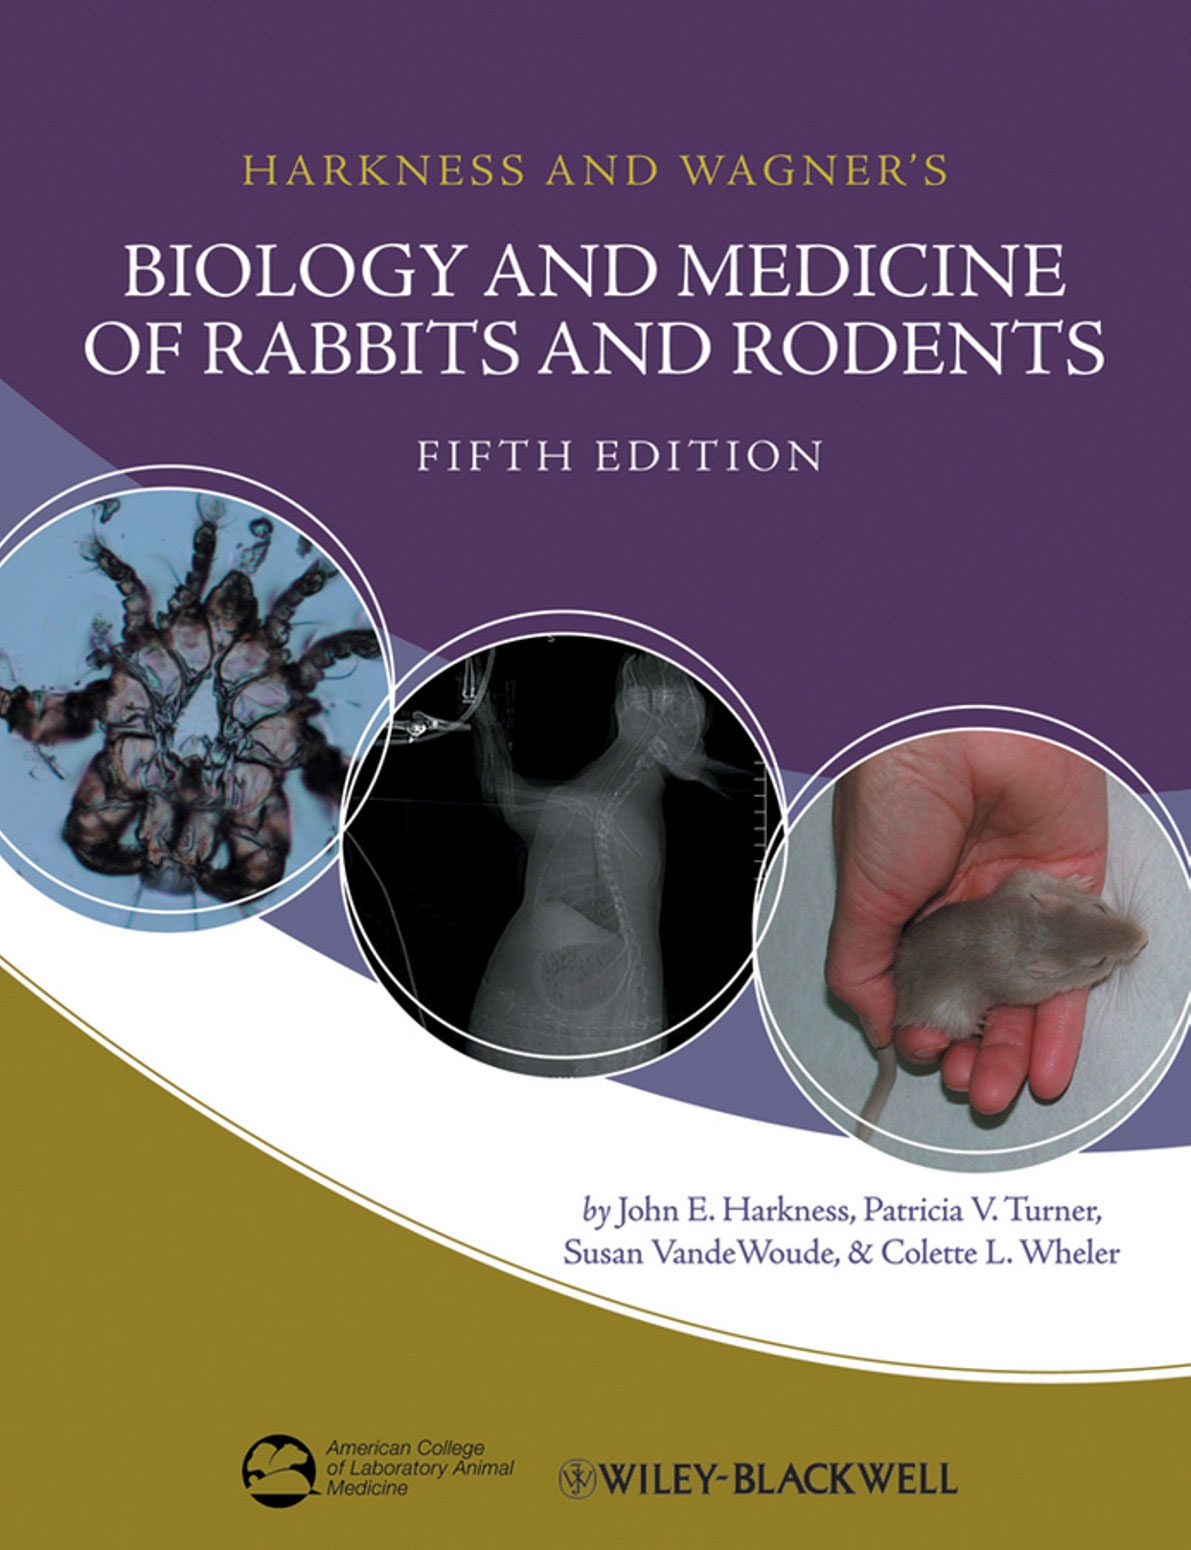 Harkness and Wagner's Biology and Medicine of Rabbits and Rodents, 5th